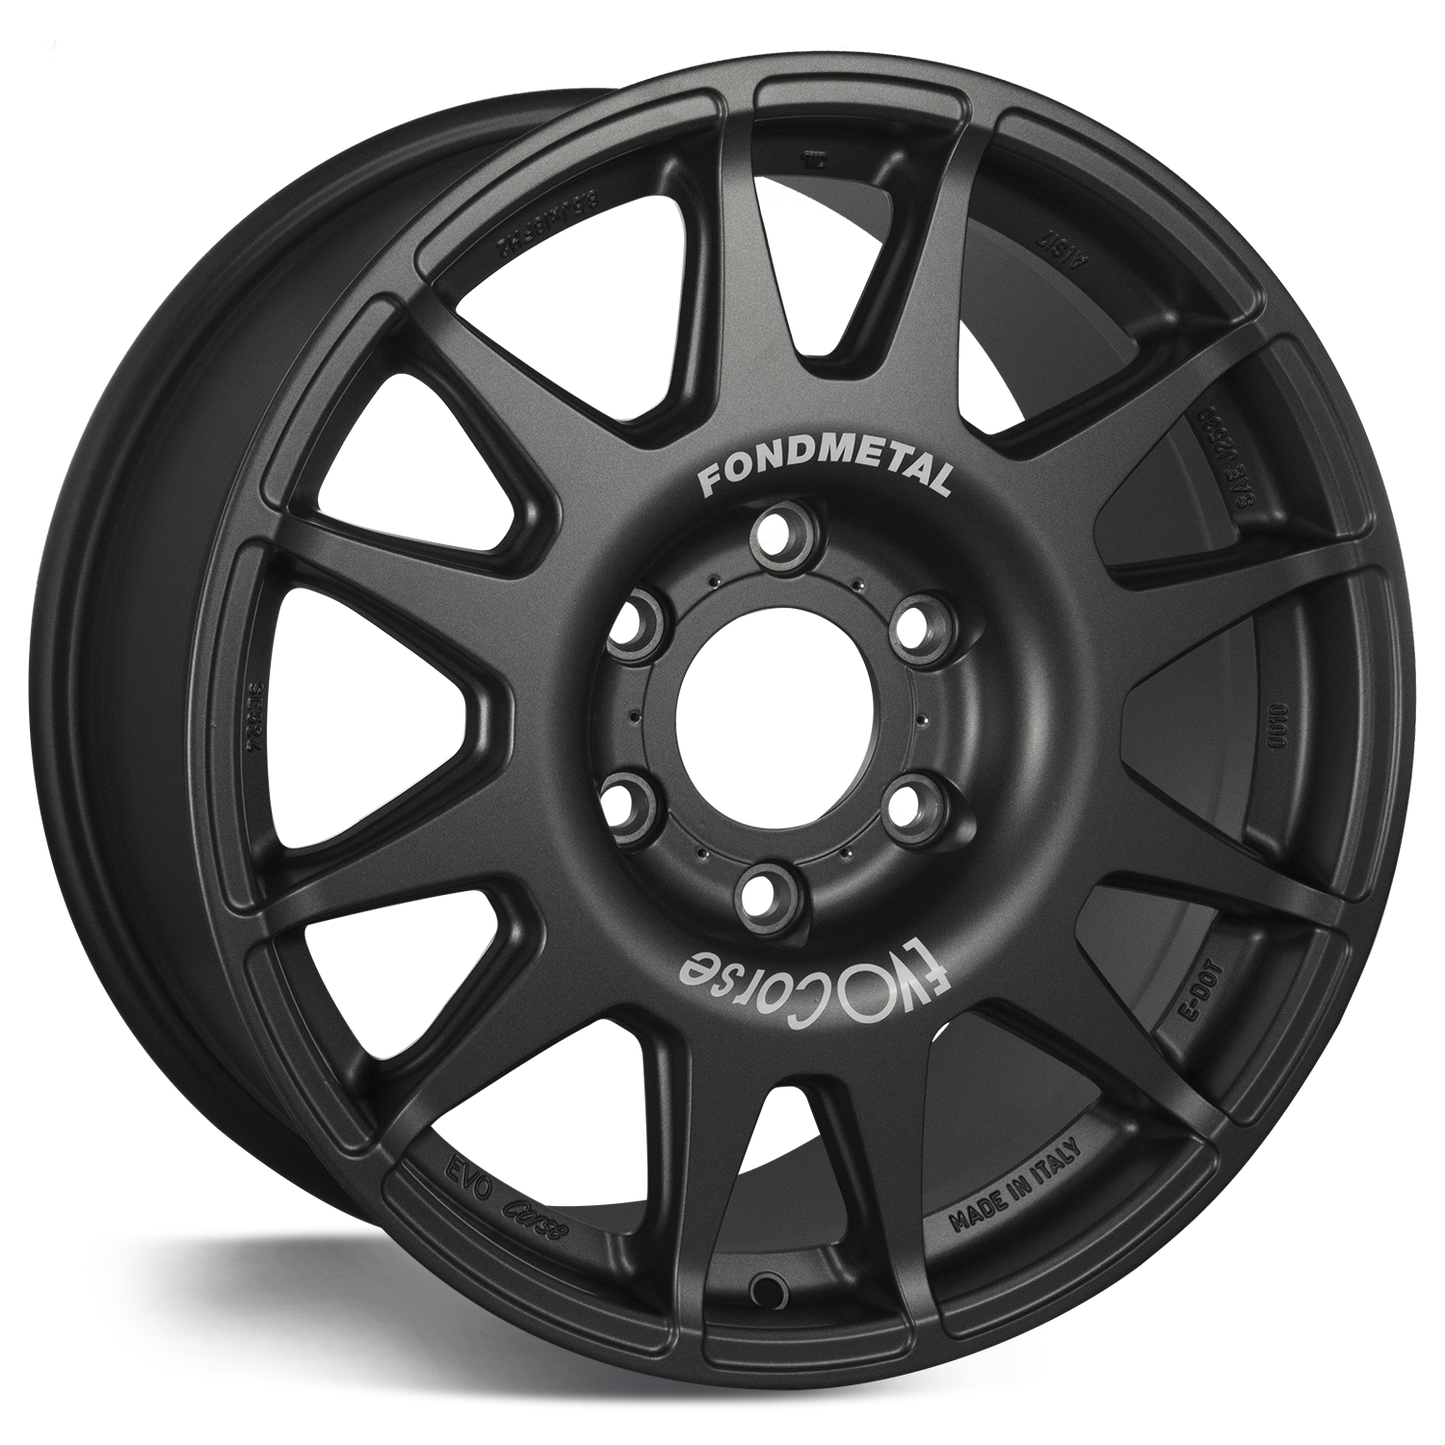 Evo Corse wheel axo view matt anthracite, for toyota land cruiser 300 series, anthracite. the 4x4 off road allow wheel with the highest high load rating for overlanding, rally, 4wd expedition use in australia. lc300 wheels, 300 series wheels, 300 series landcruiser wheels, what is the best offset for you land cruiser 300 wheels? This 18x8.5 ET47